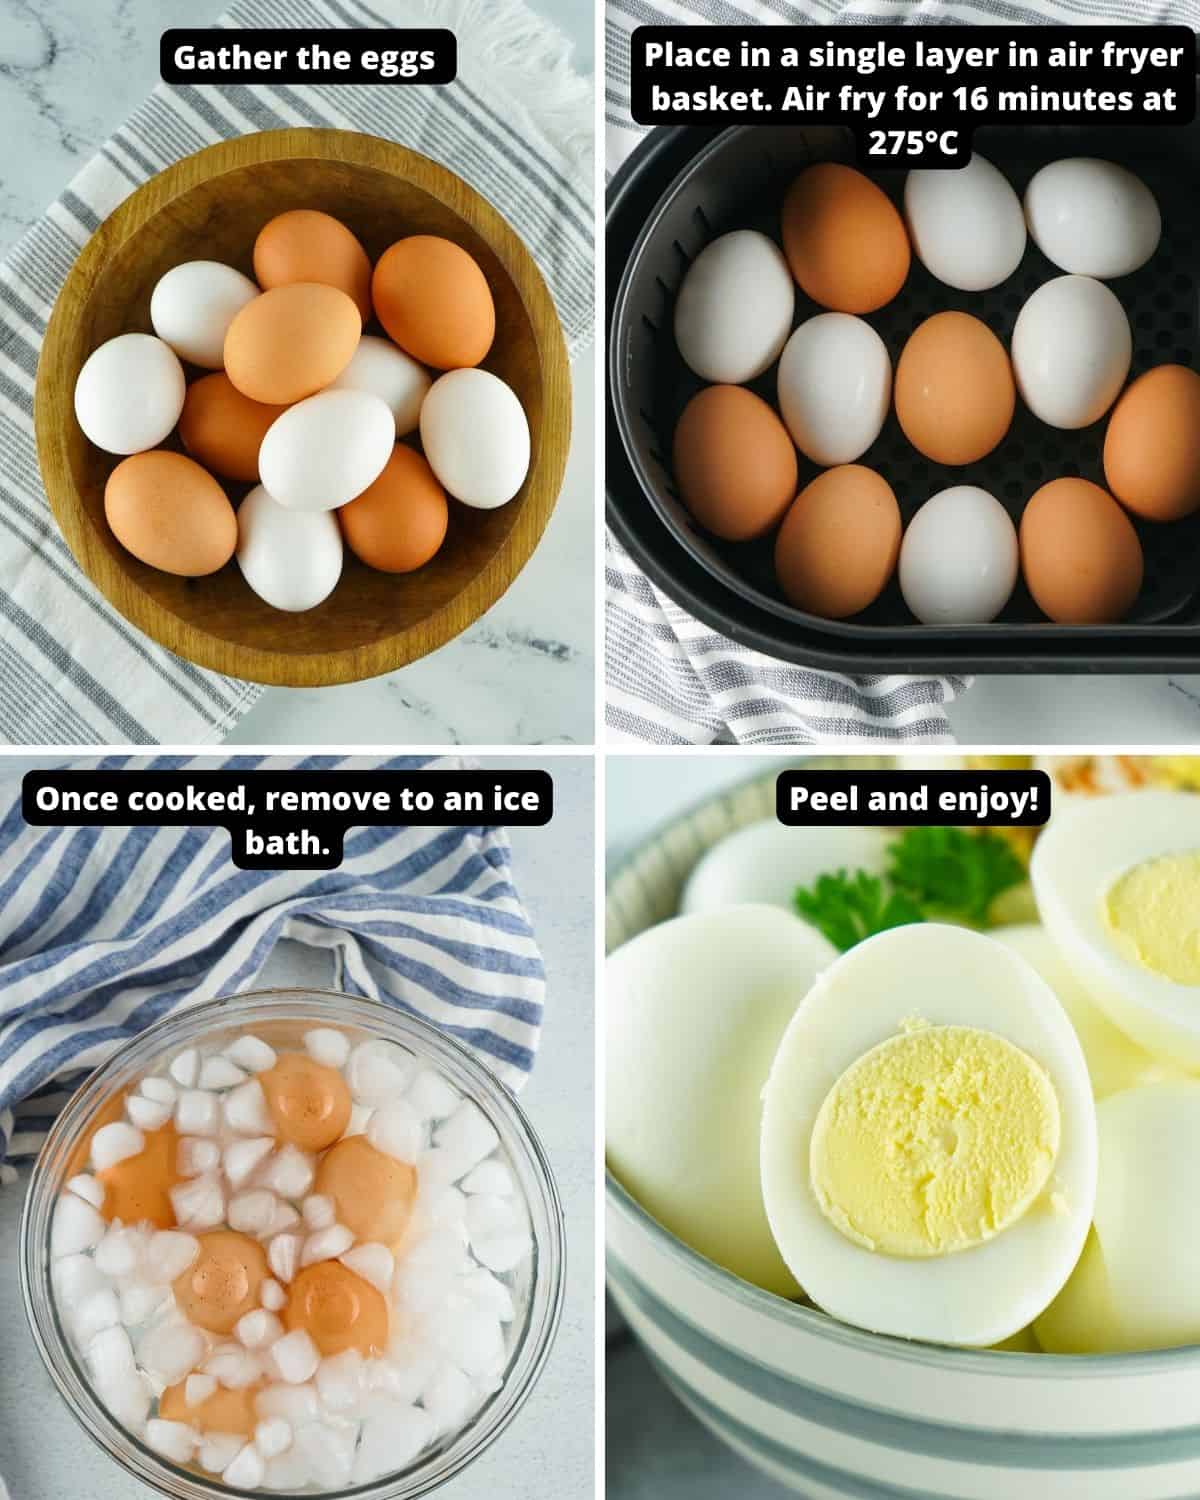 Step by step picture instructions to make air fryer hard boiled eggs. 